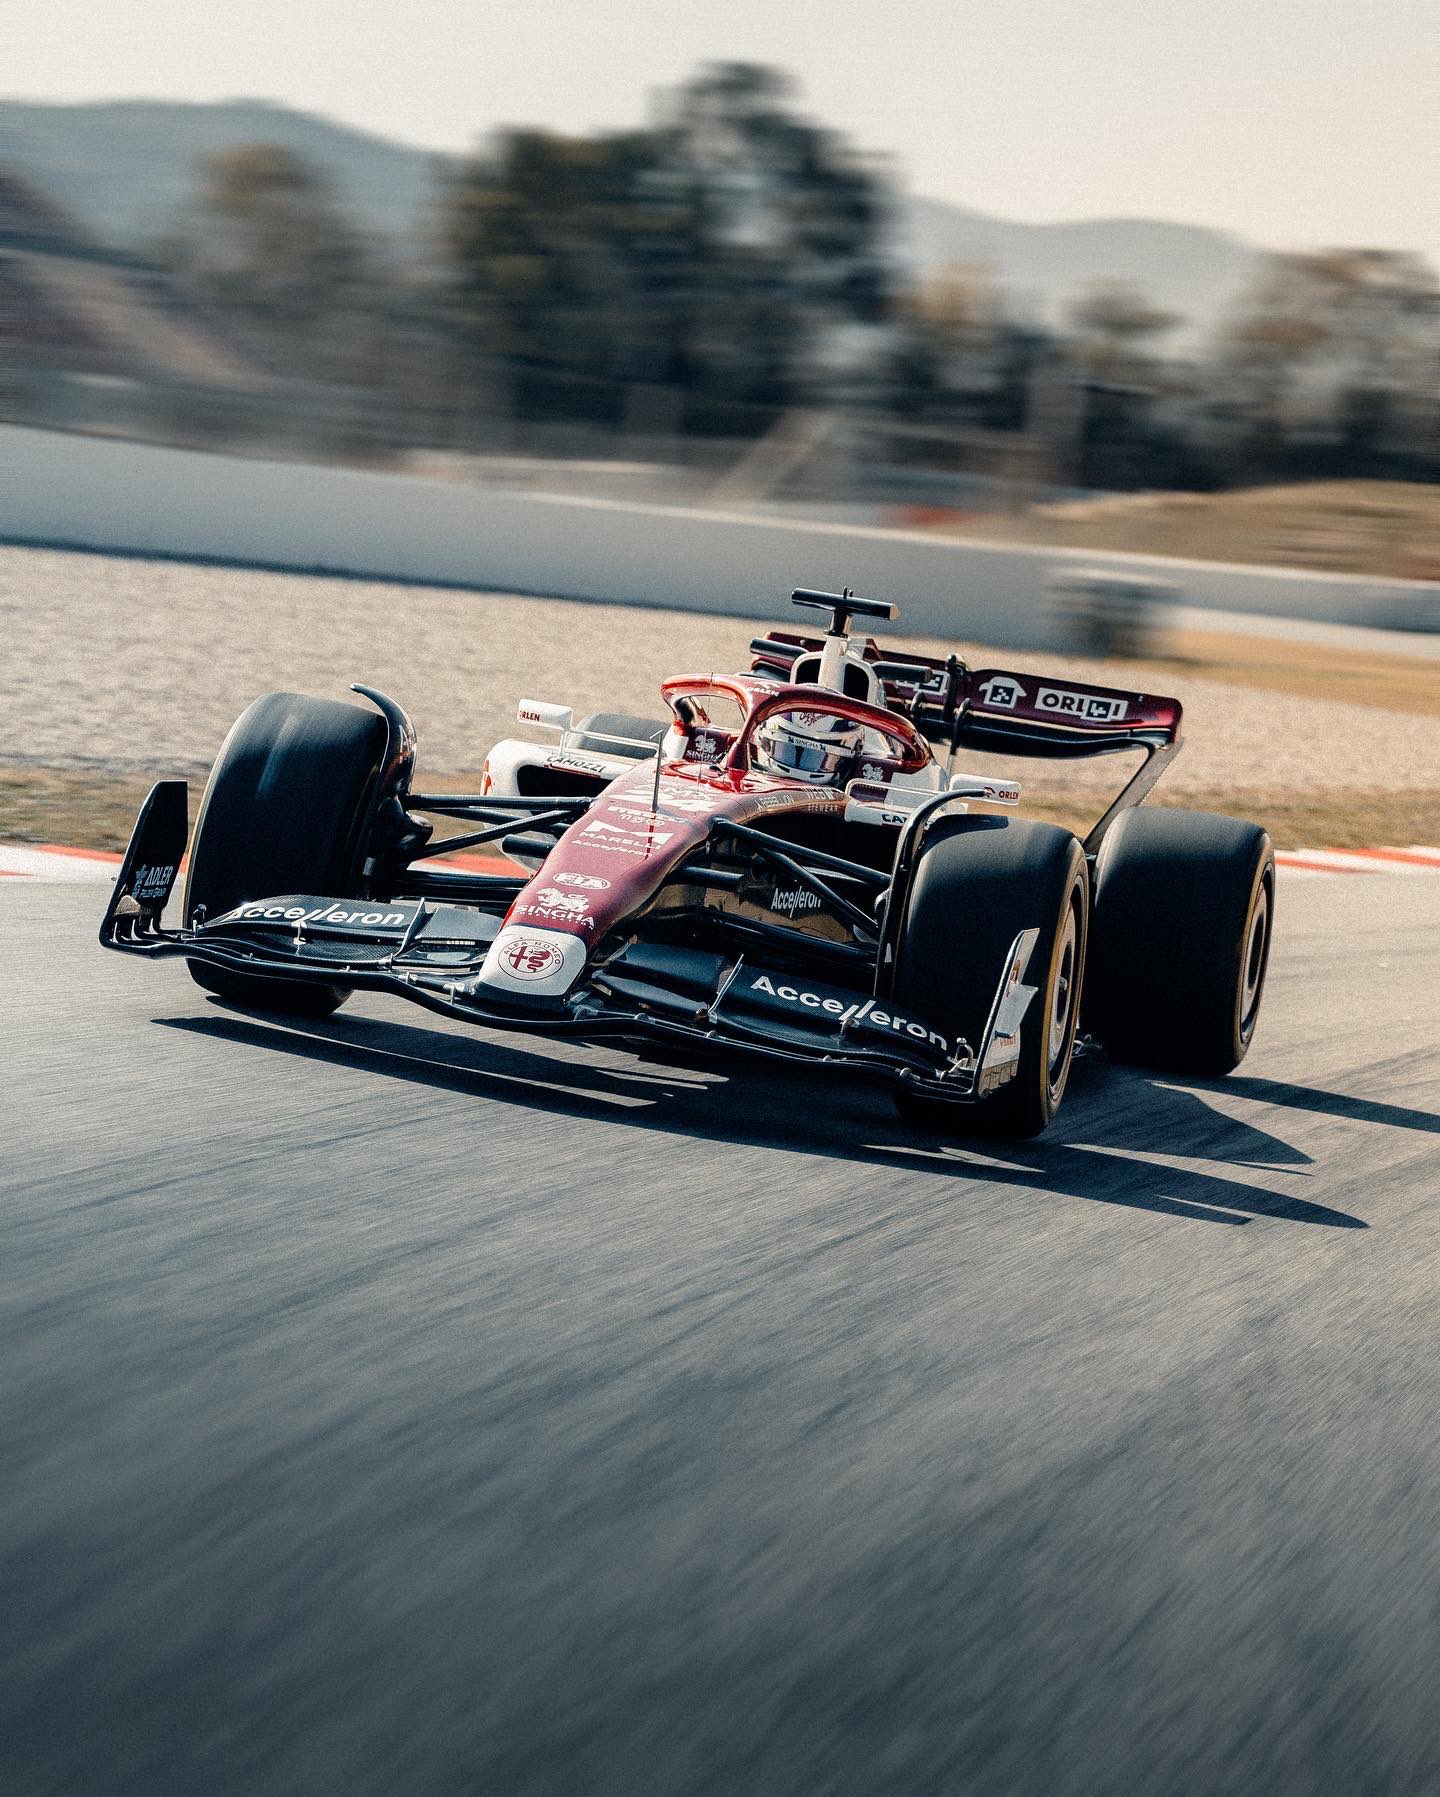  Alfa Romeo technical boss explains the company’s different car designs for the new F1 season